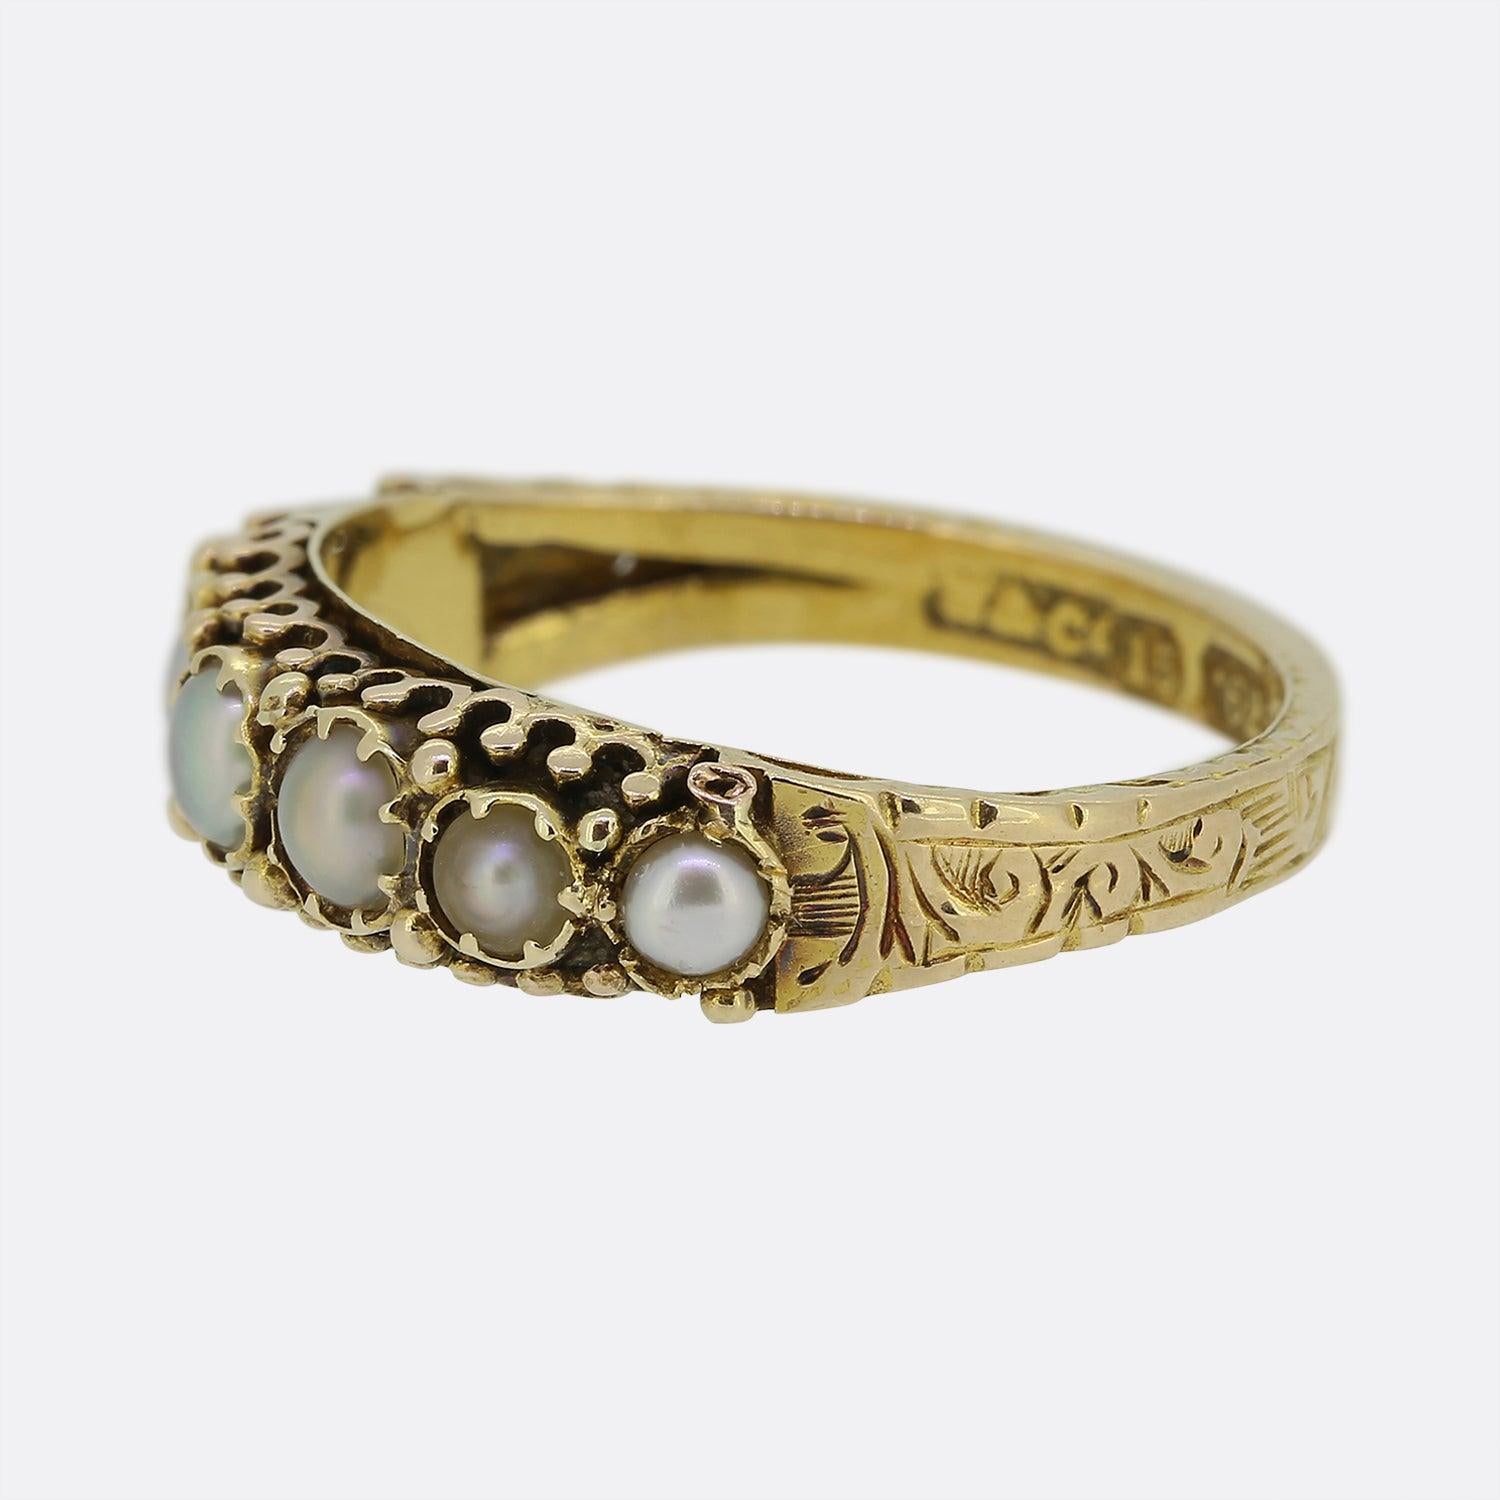 Here we have a charming seven-stone ring dating back to the Victorian period. A 15ct yellow gold mount plays host to seven round natural pearls which have been individually claw set in a single line formation across the face. This piece is complete